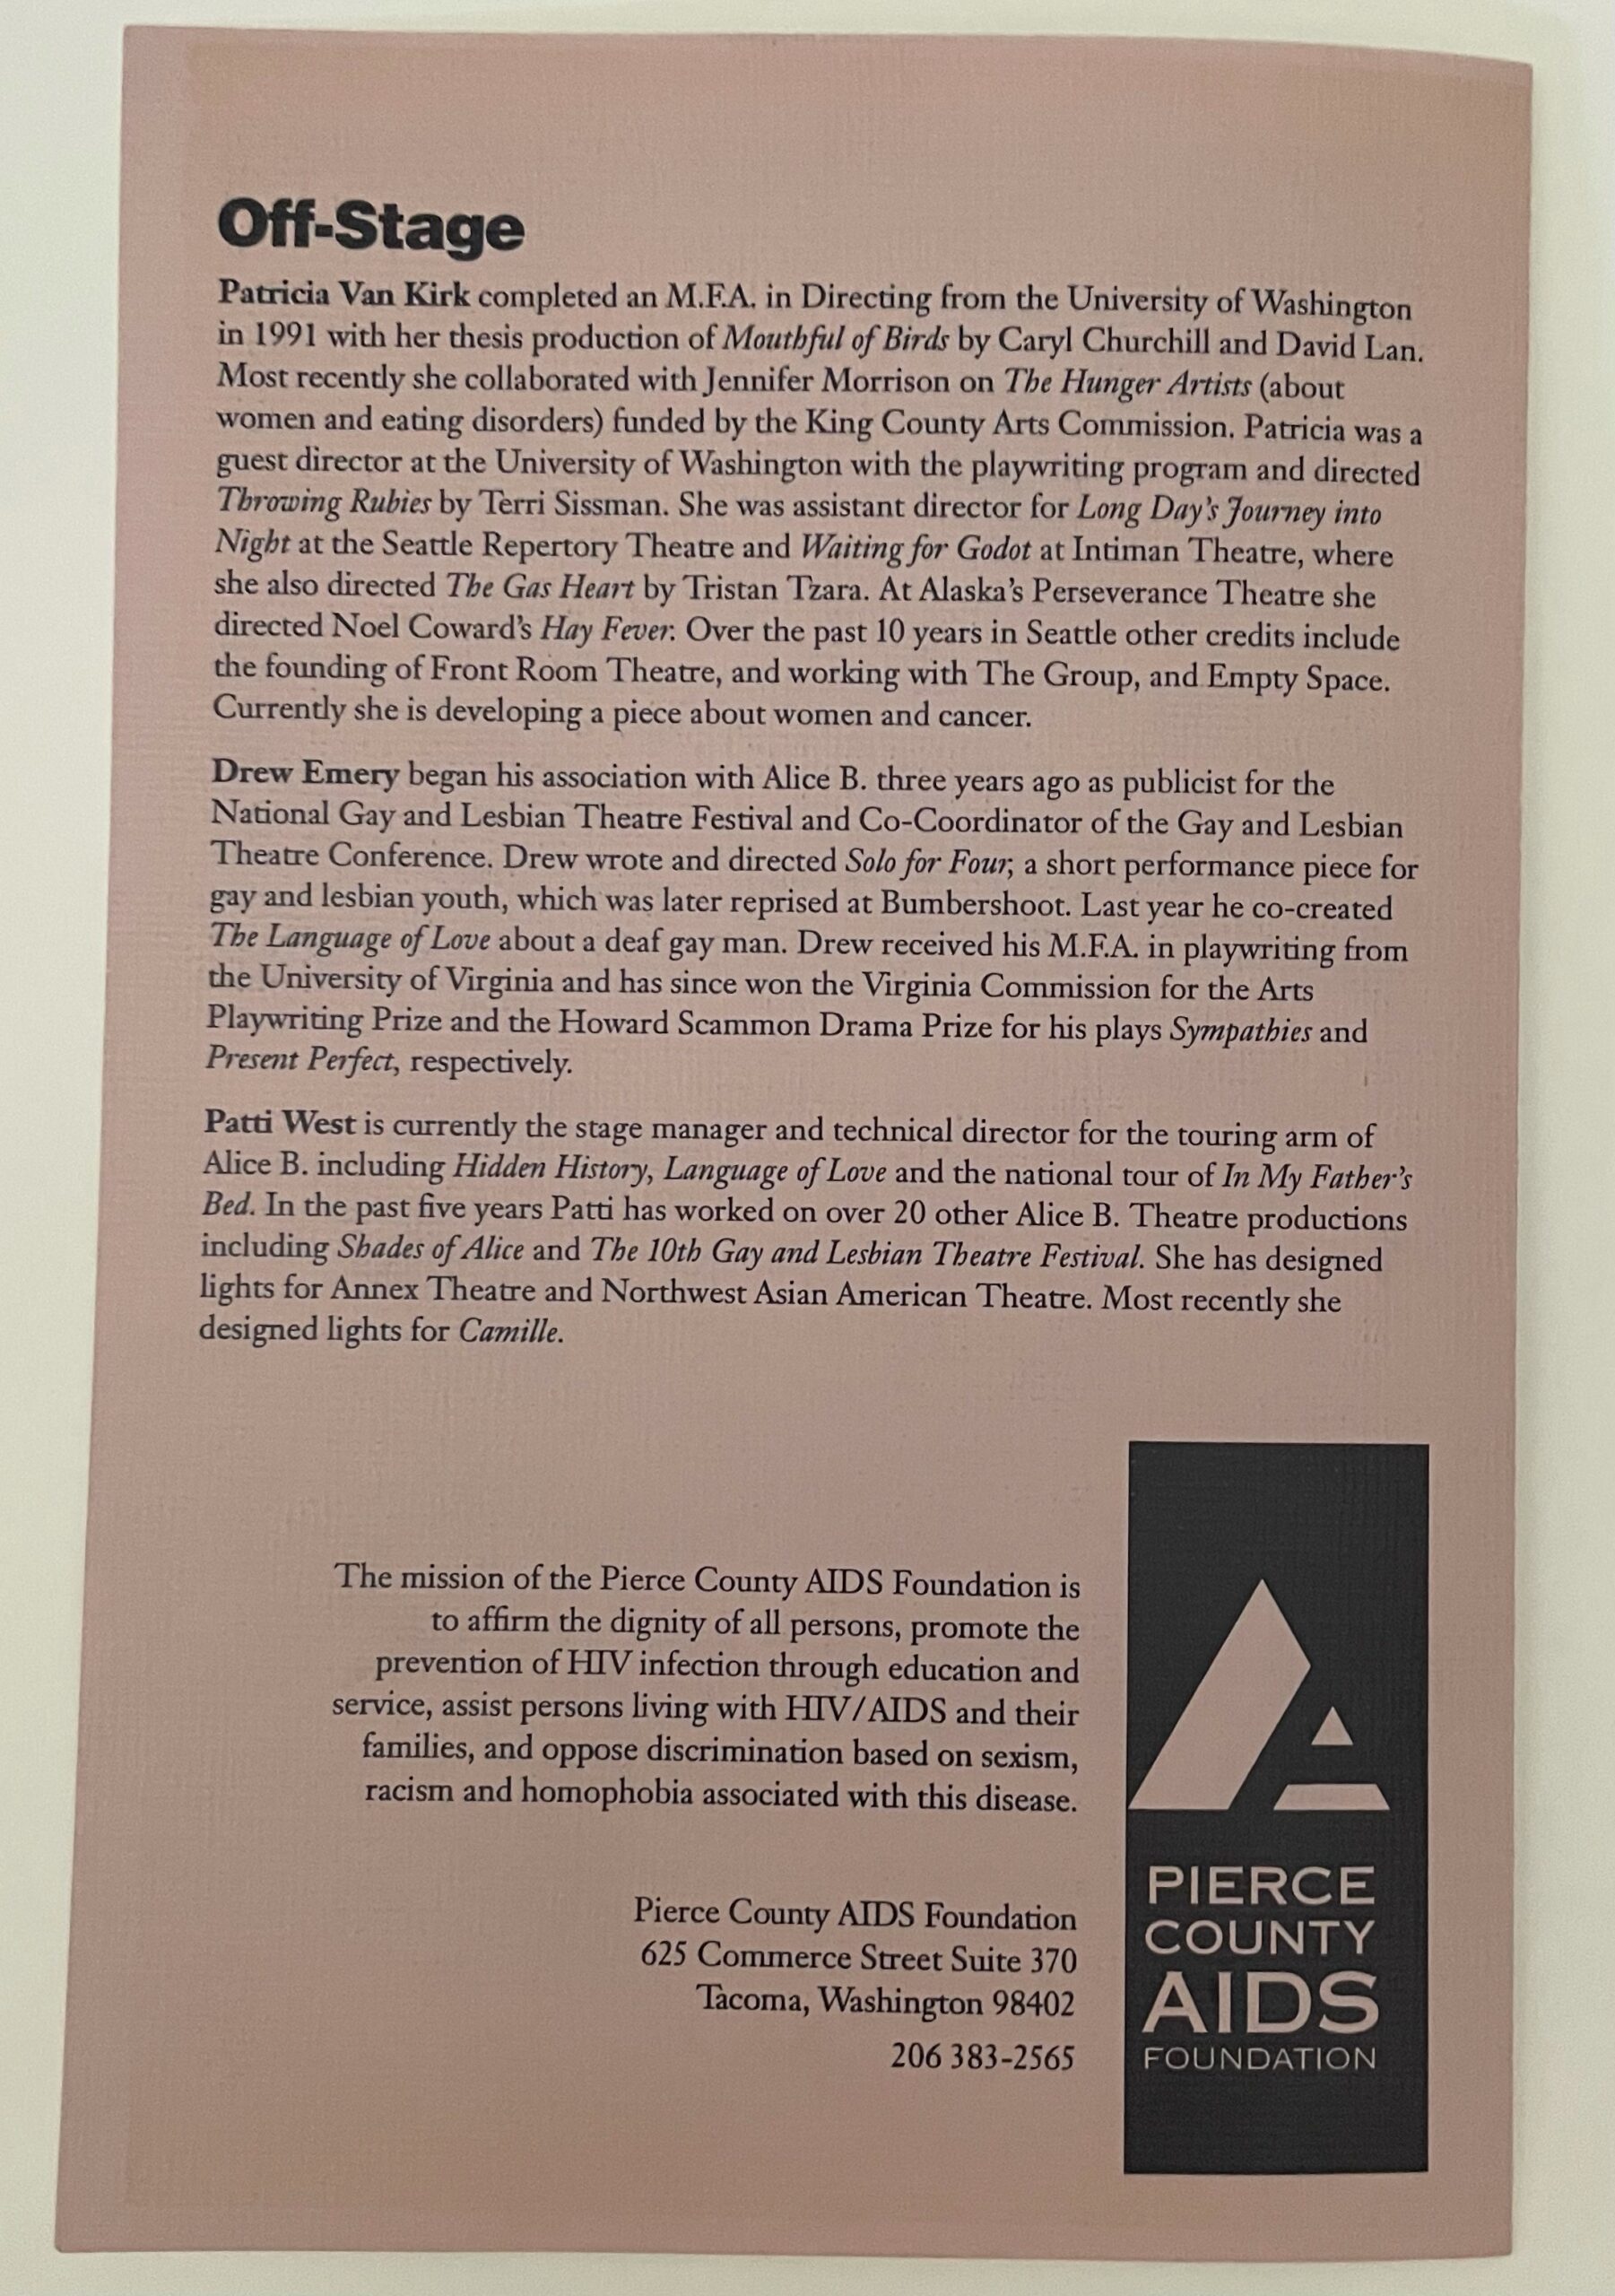 Page from the "Hidden History" program (1994) describing the director (Patricia Van Kirk), playwright (Drew Emery) and touring stage manager/director (Patti West).